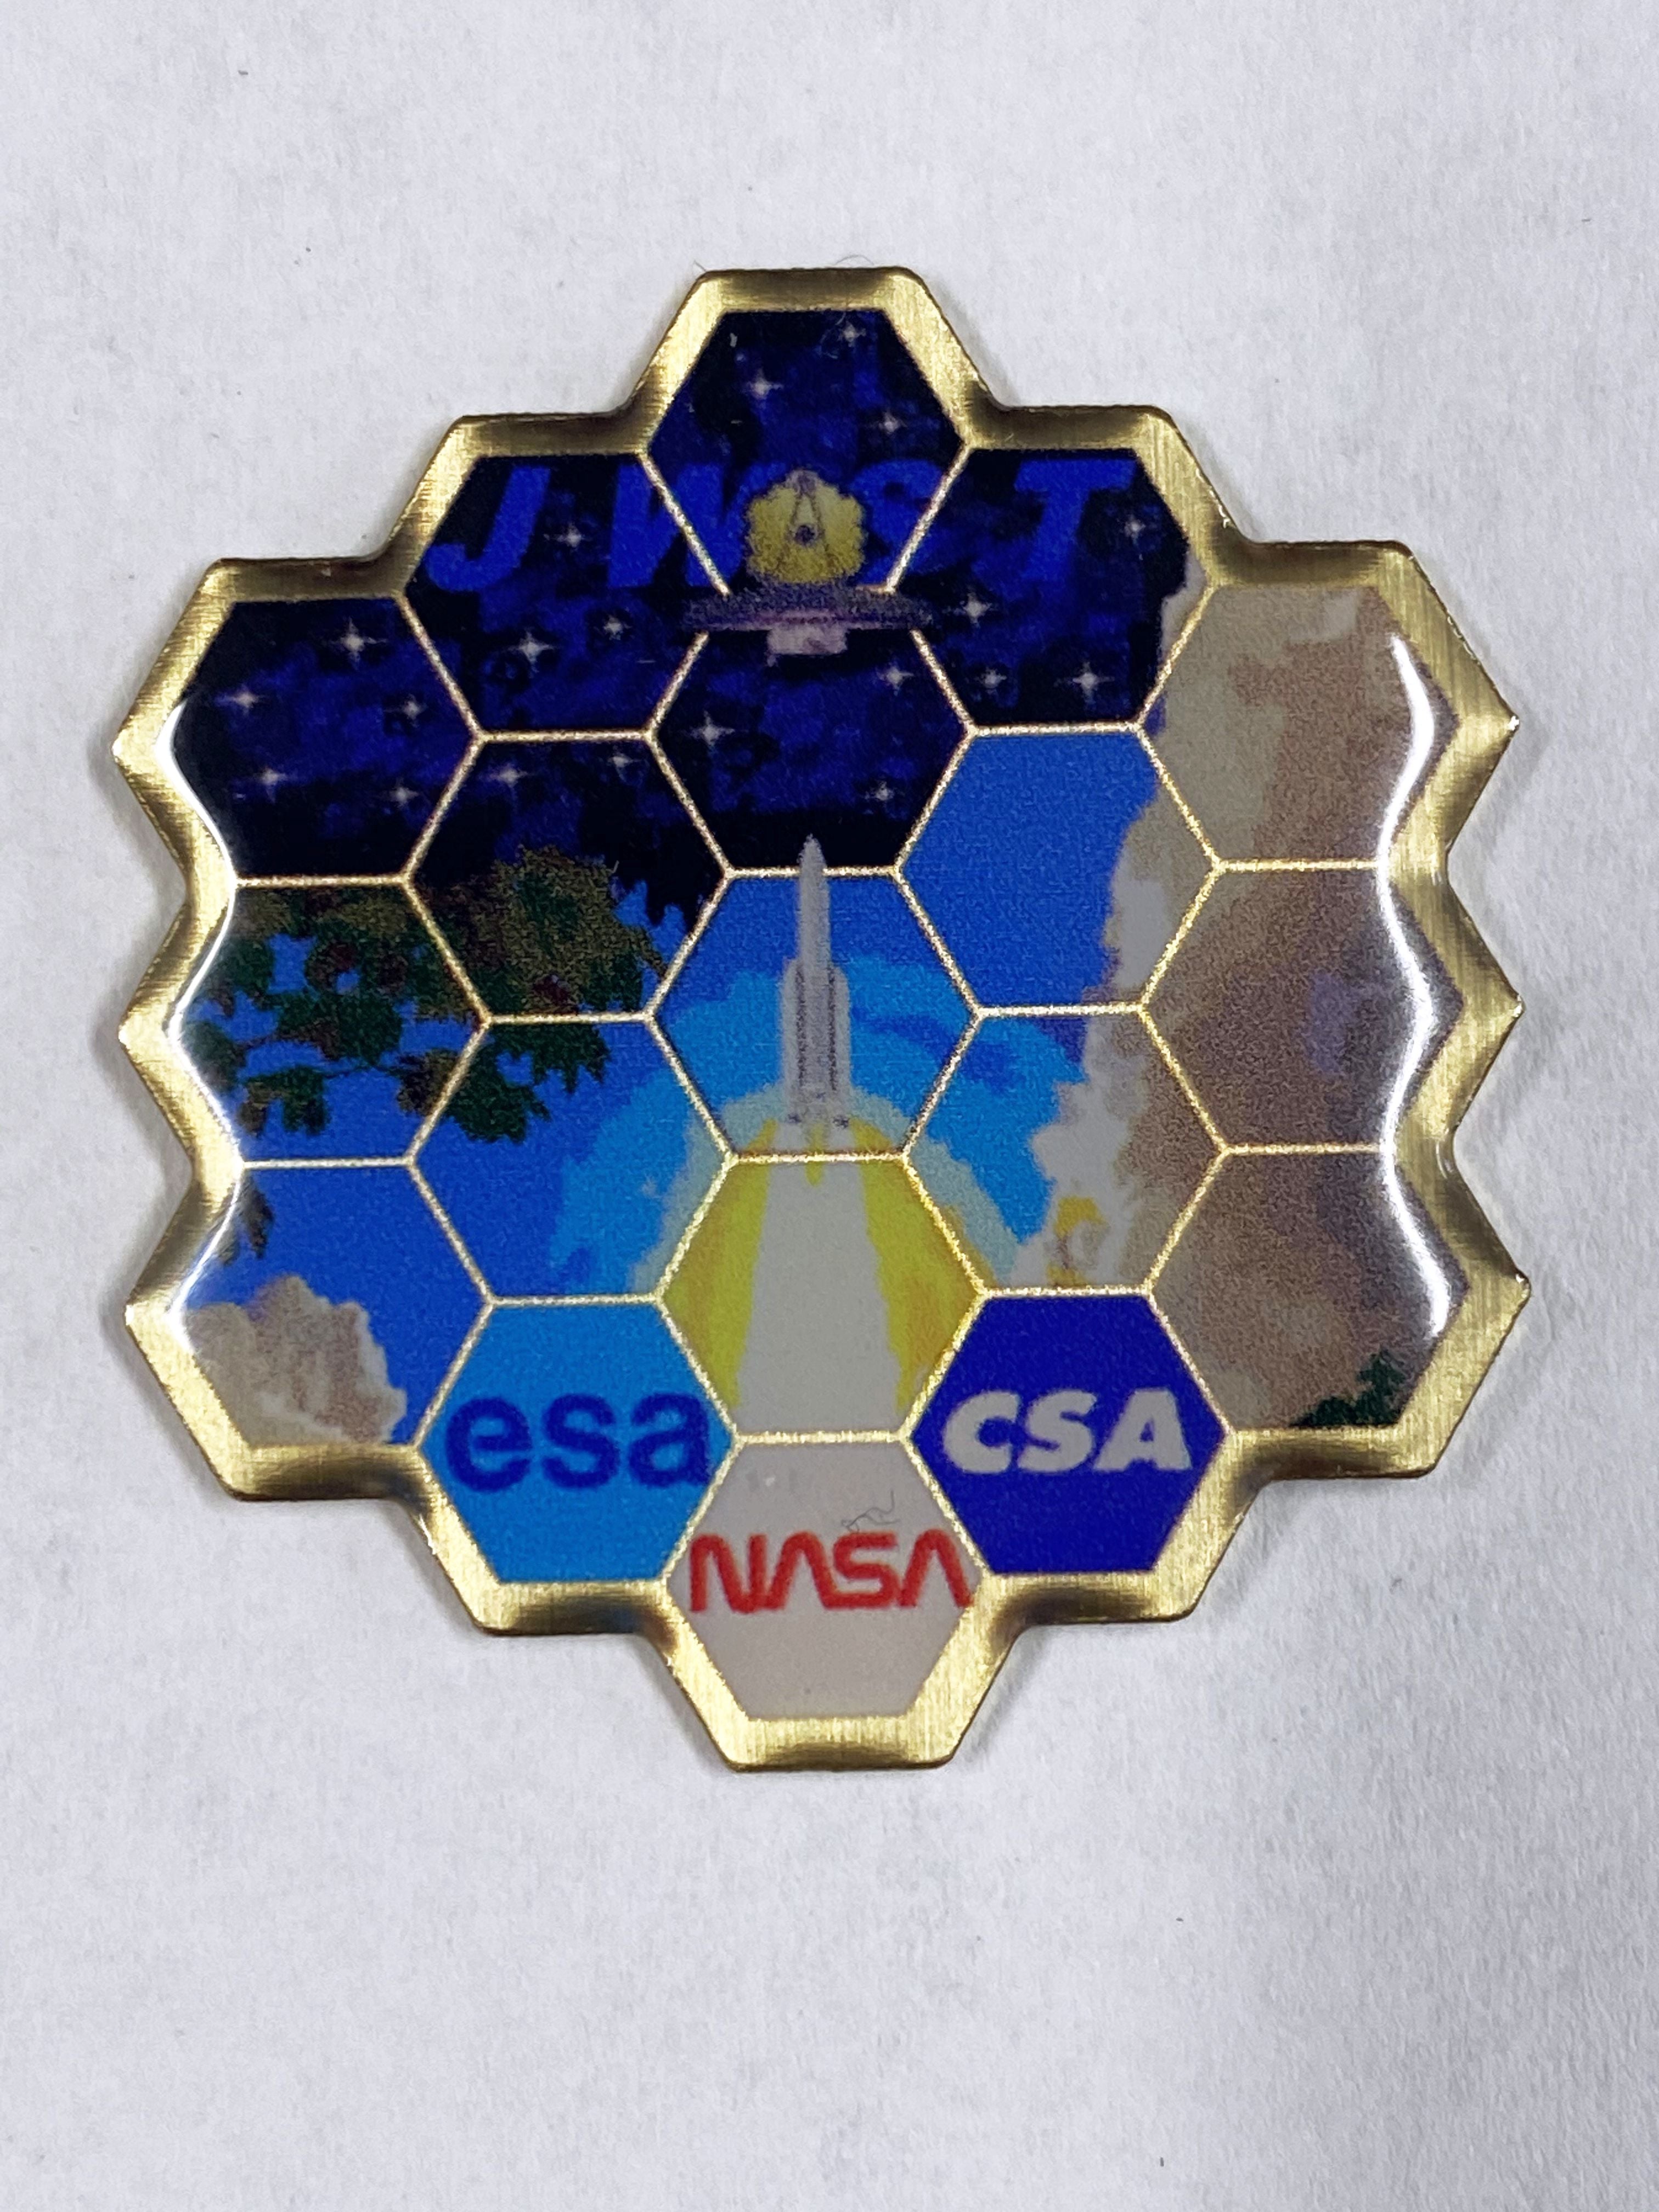 JWST Mission Lapel Pin - The Space Store